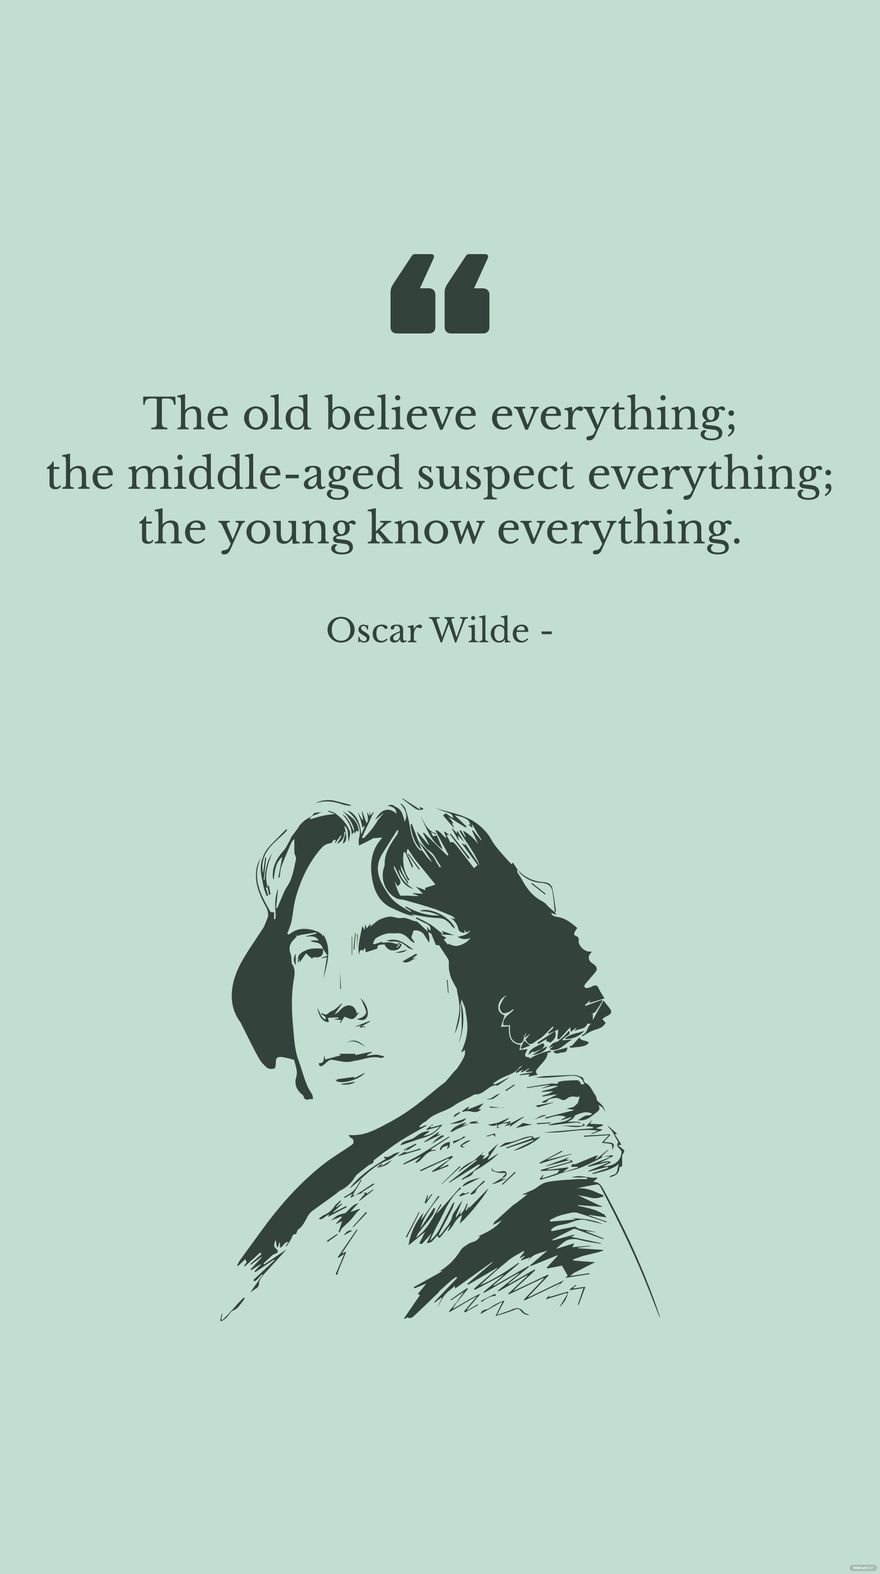 Oscar Wilde - The old believe everything; the middle-aged suspect everything; the young know everything.